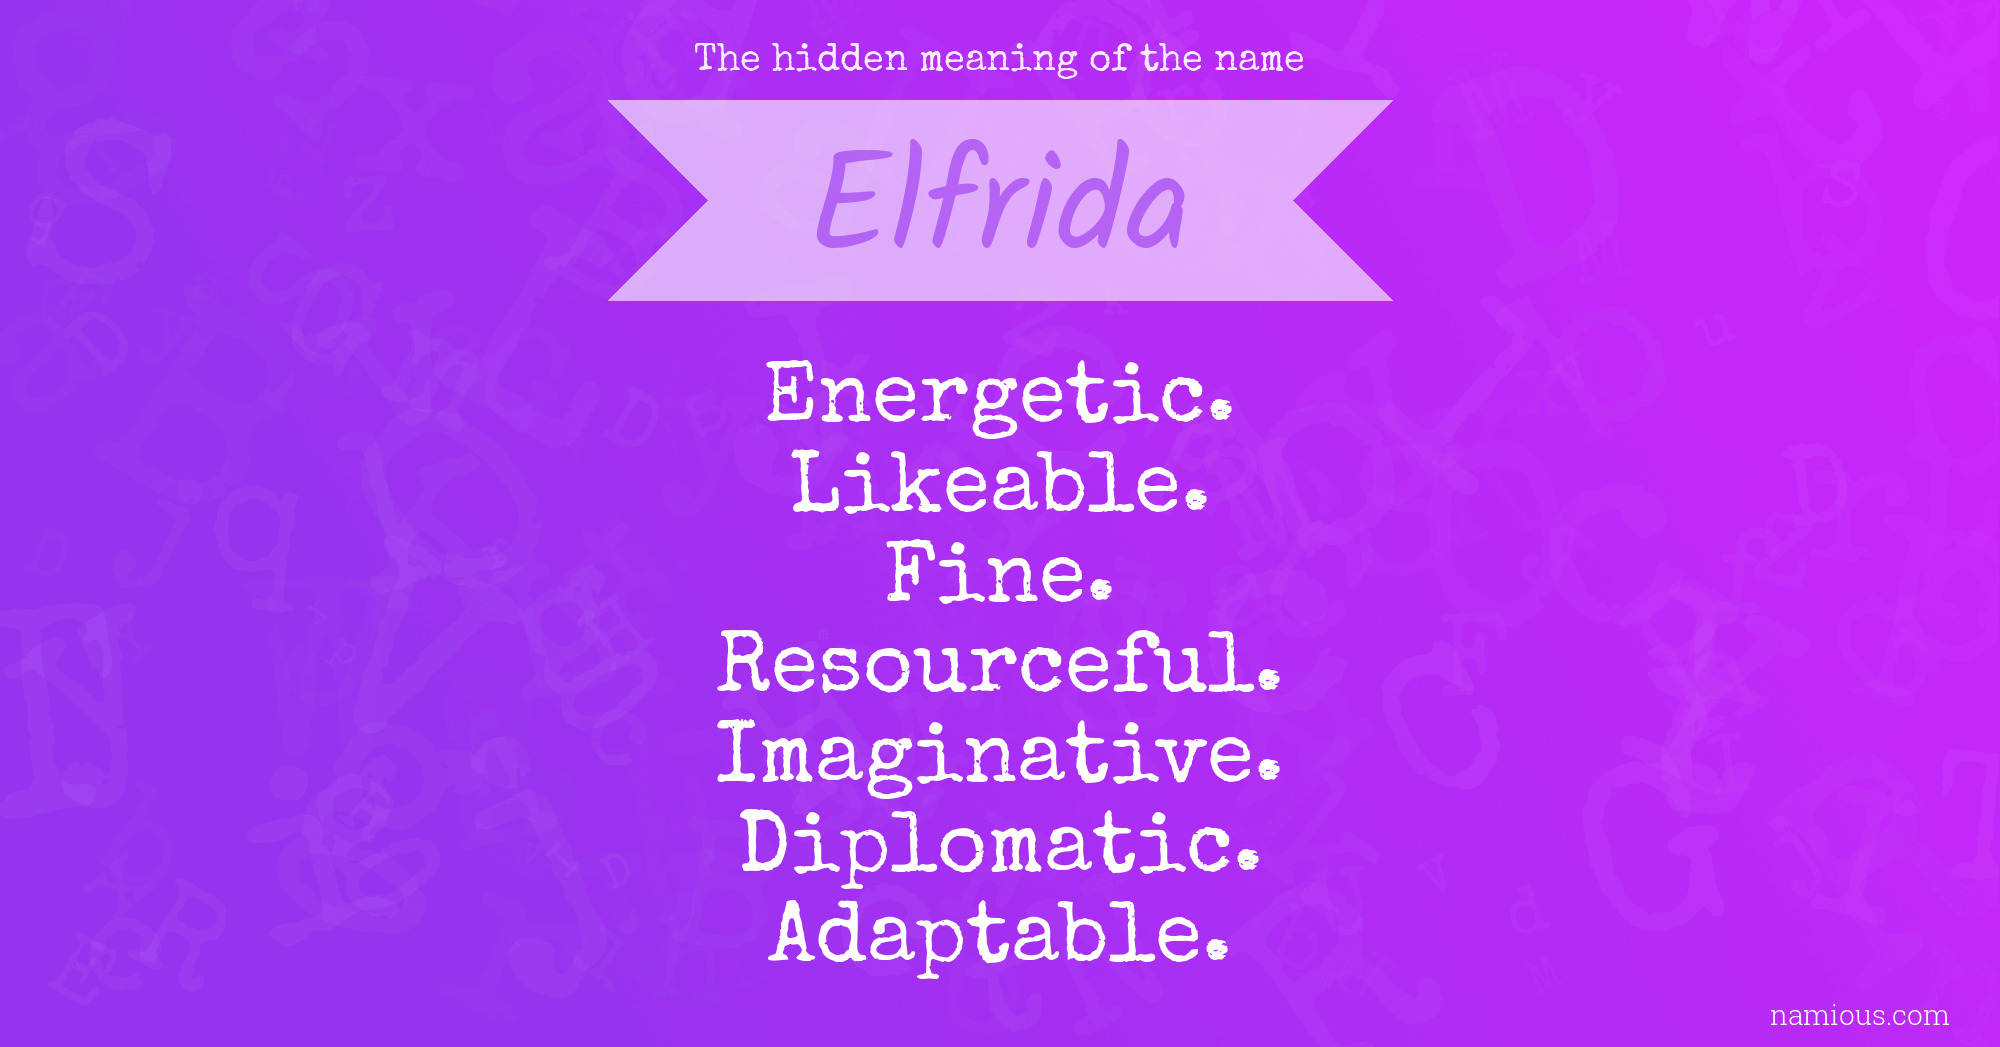 The hidden meaning of the name Elfrida